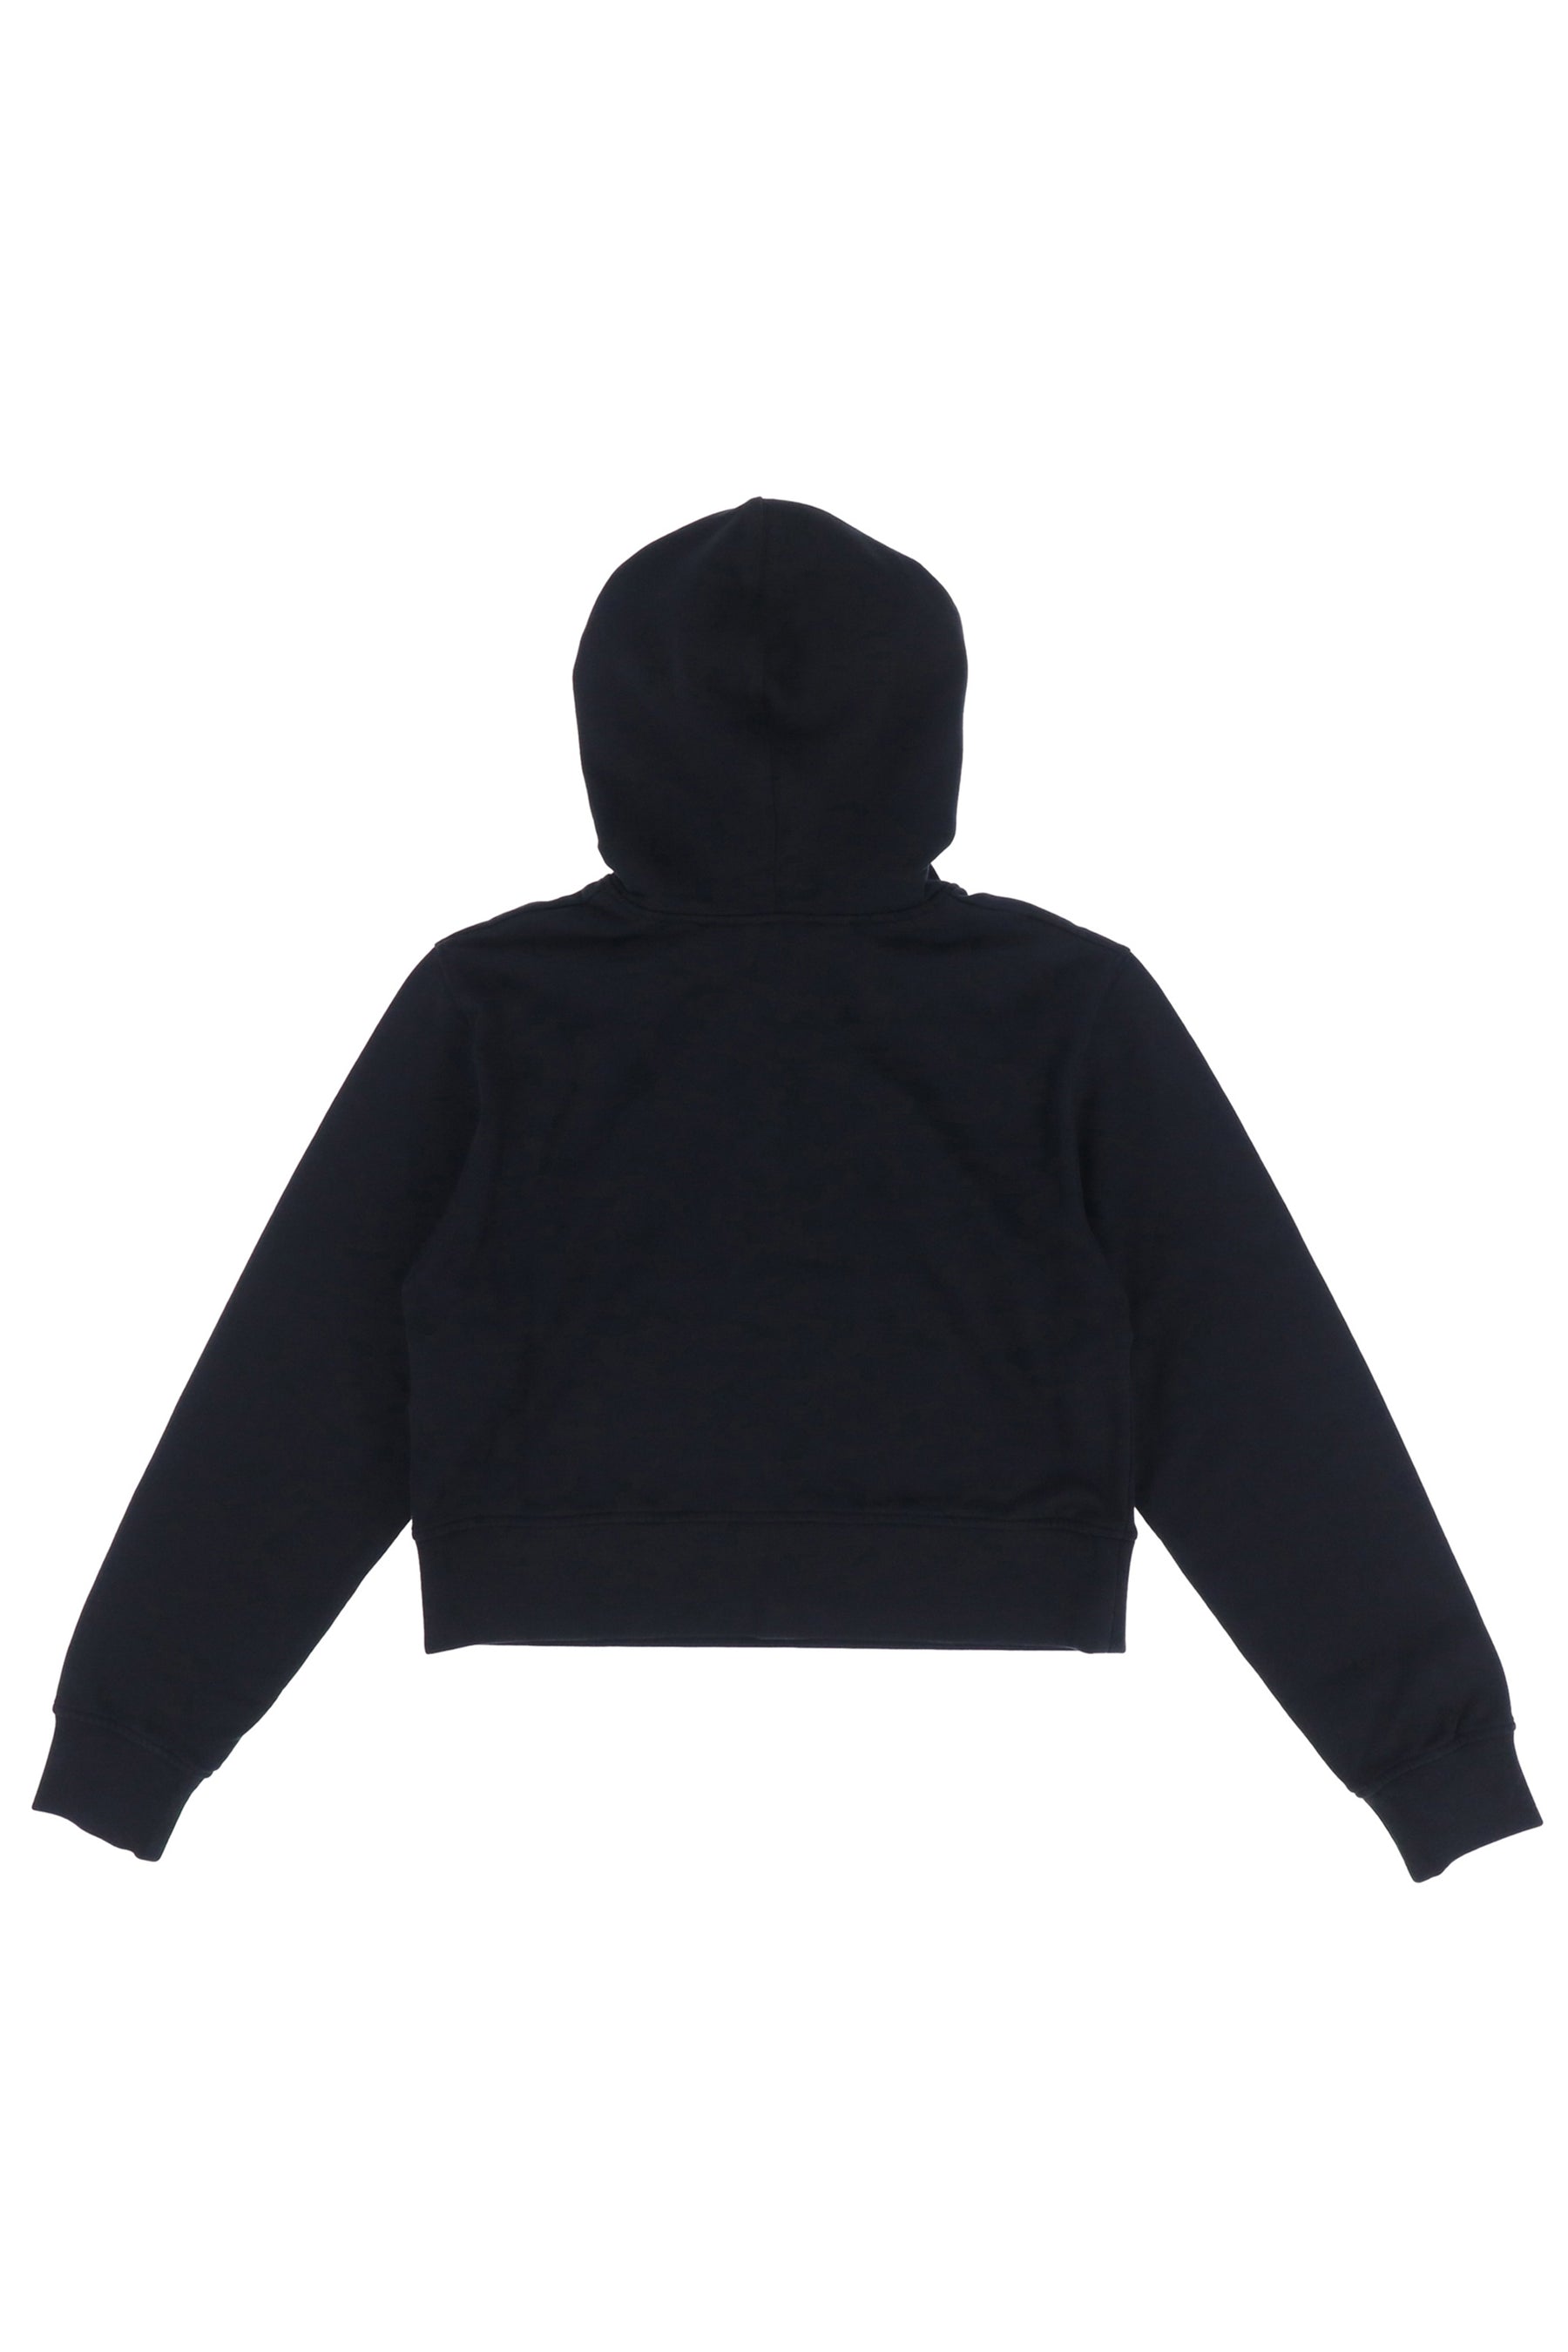 PALM ANGELS 75001 FIT HOODY / BLK WHT